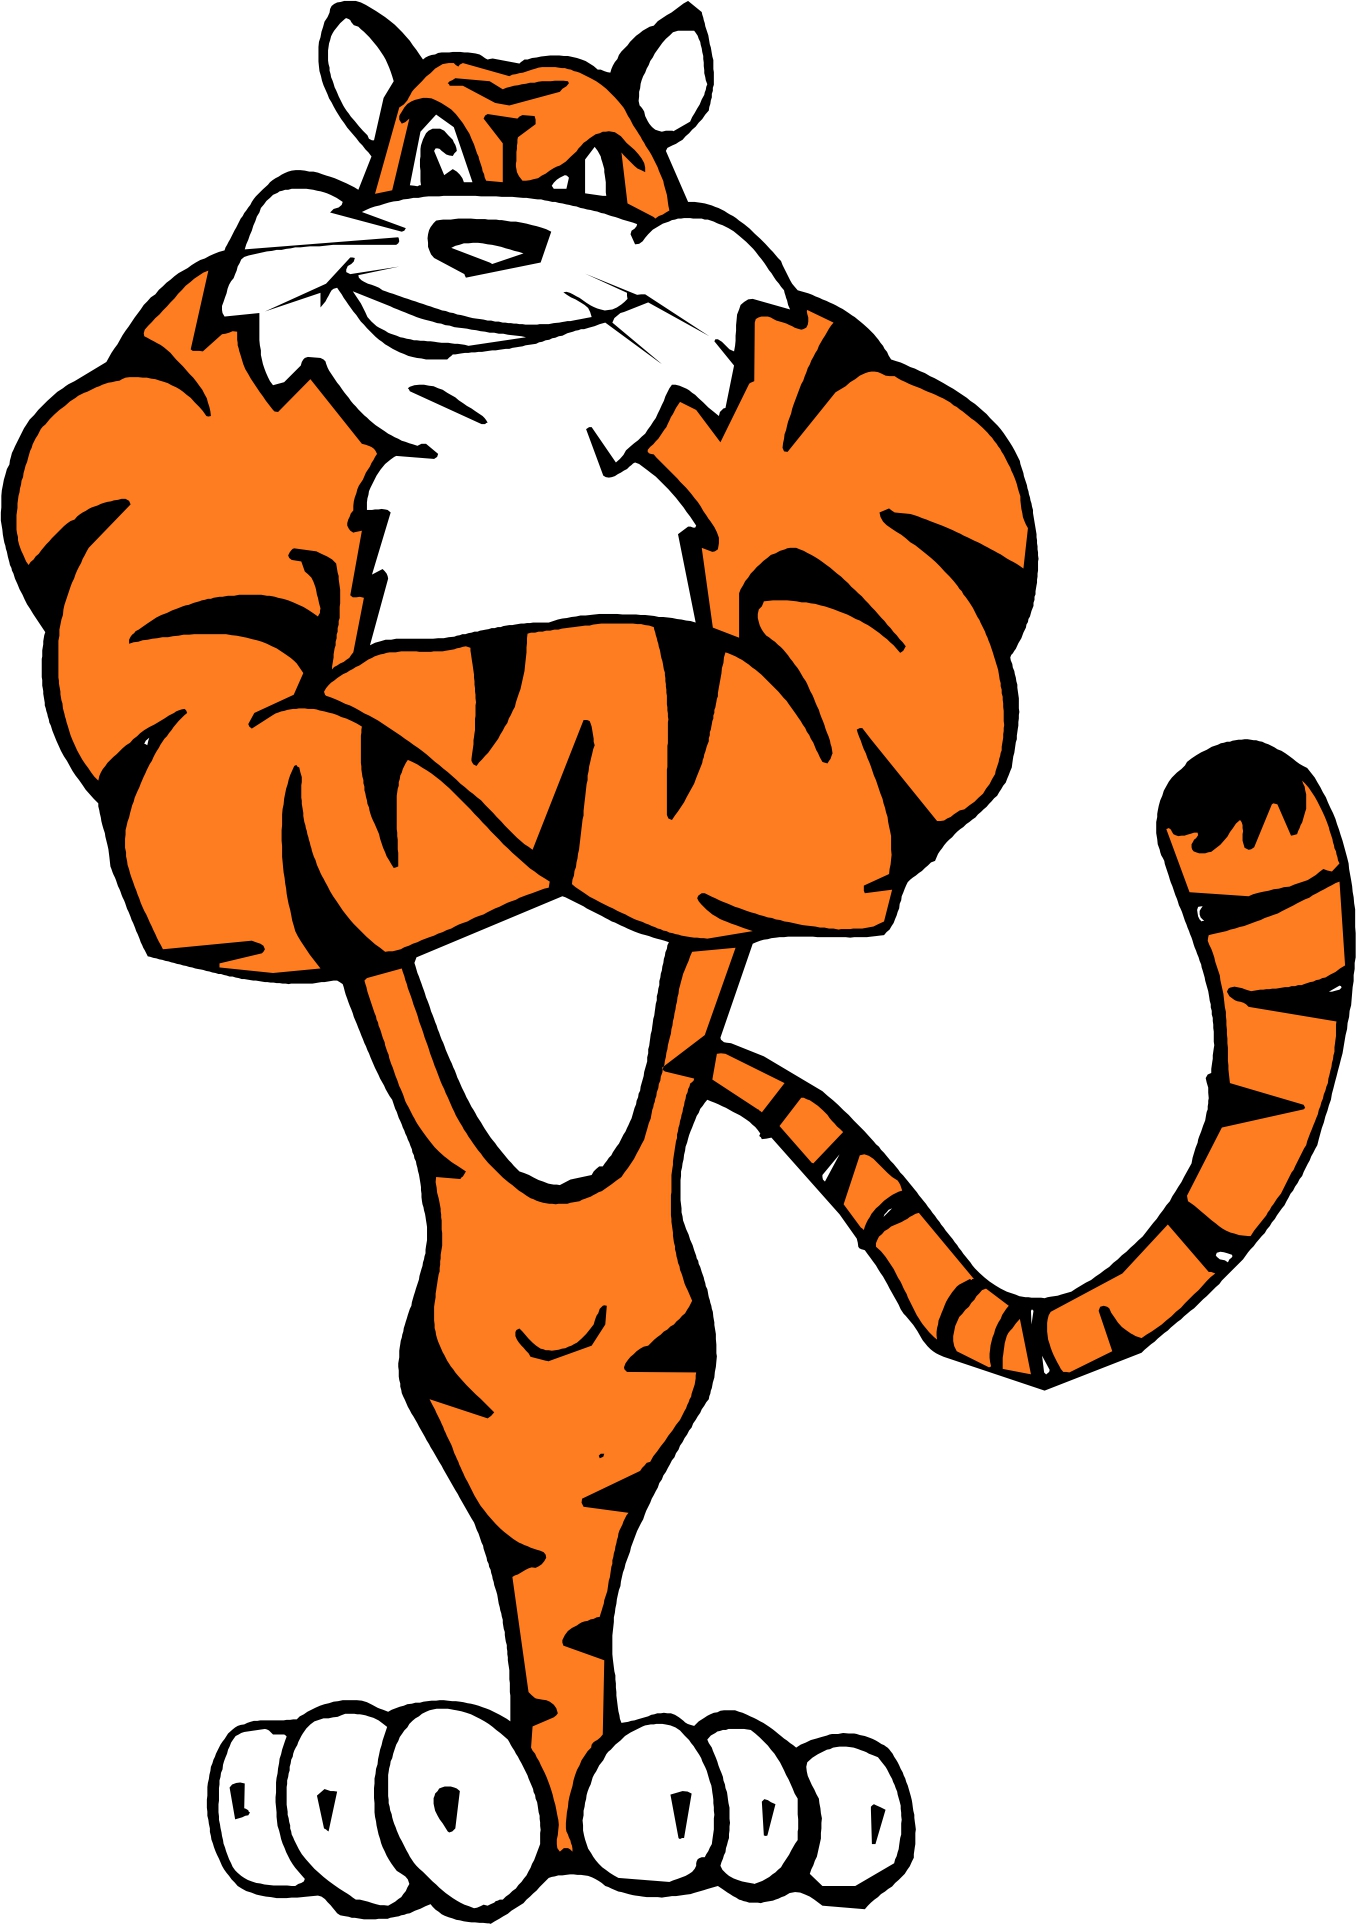 Picture Of A Cartoon Tiger   Clipart Best